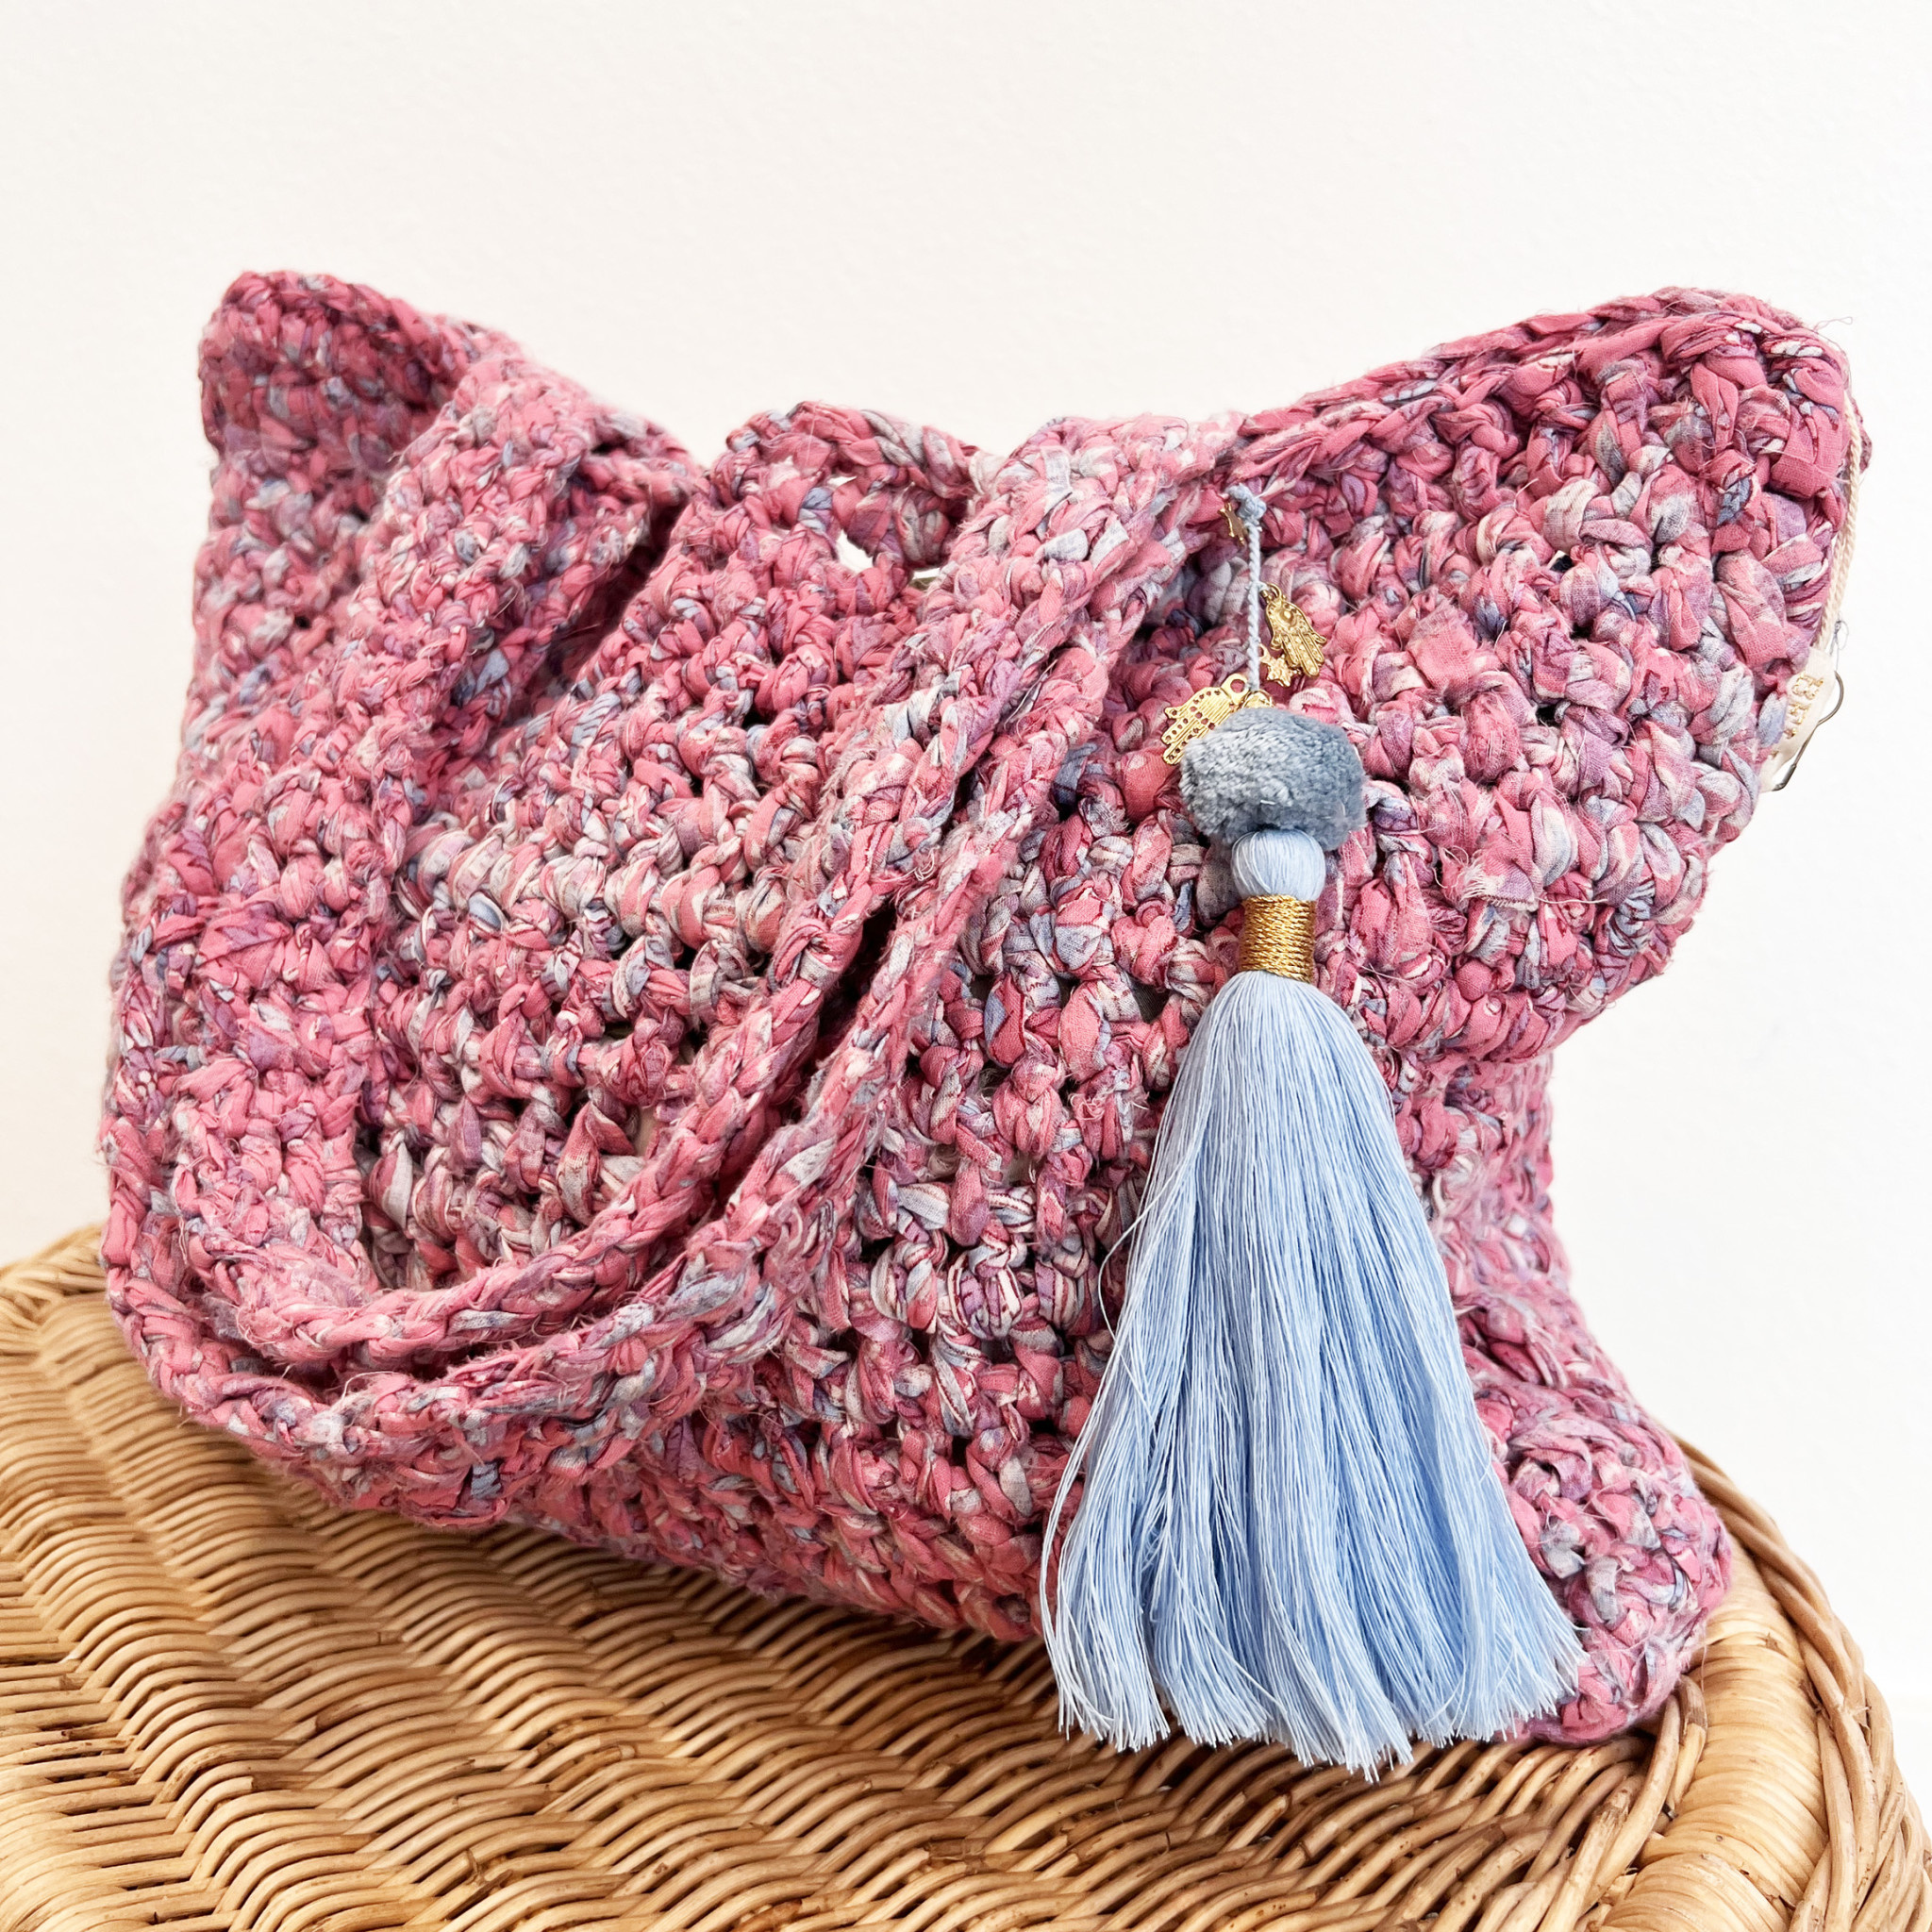 9+ Cute Crochet Free Bag Pattern Design Ideas and Images - Page 8 of 9 -  Isabella Canden Blog! | Crochet bag pattern free, Crochet handbags  patterns, Free crochet bag